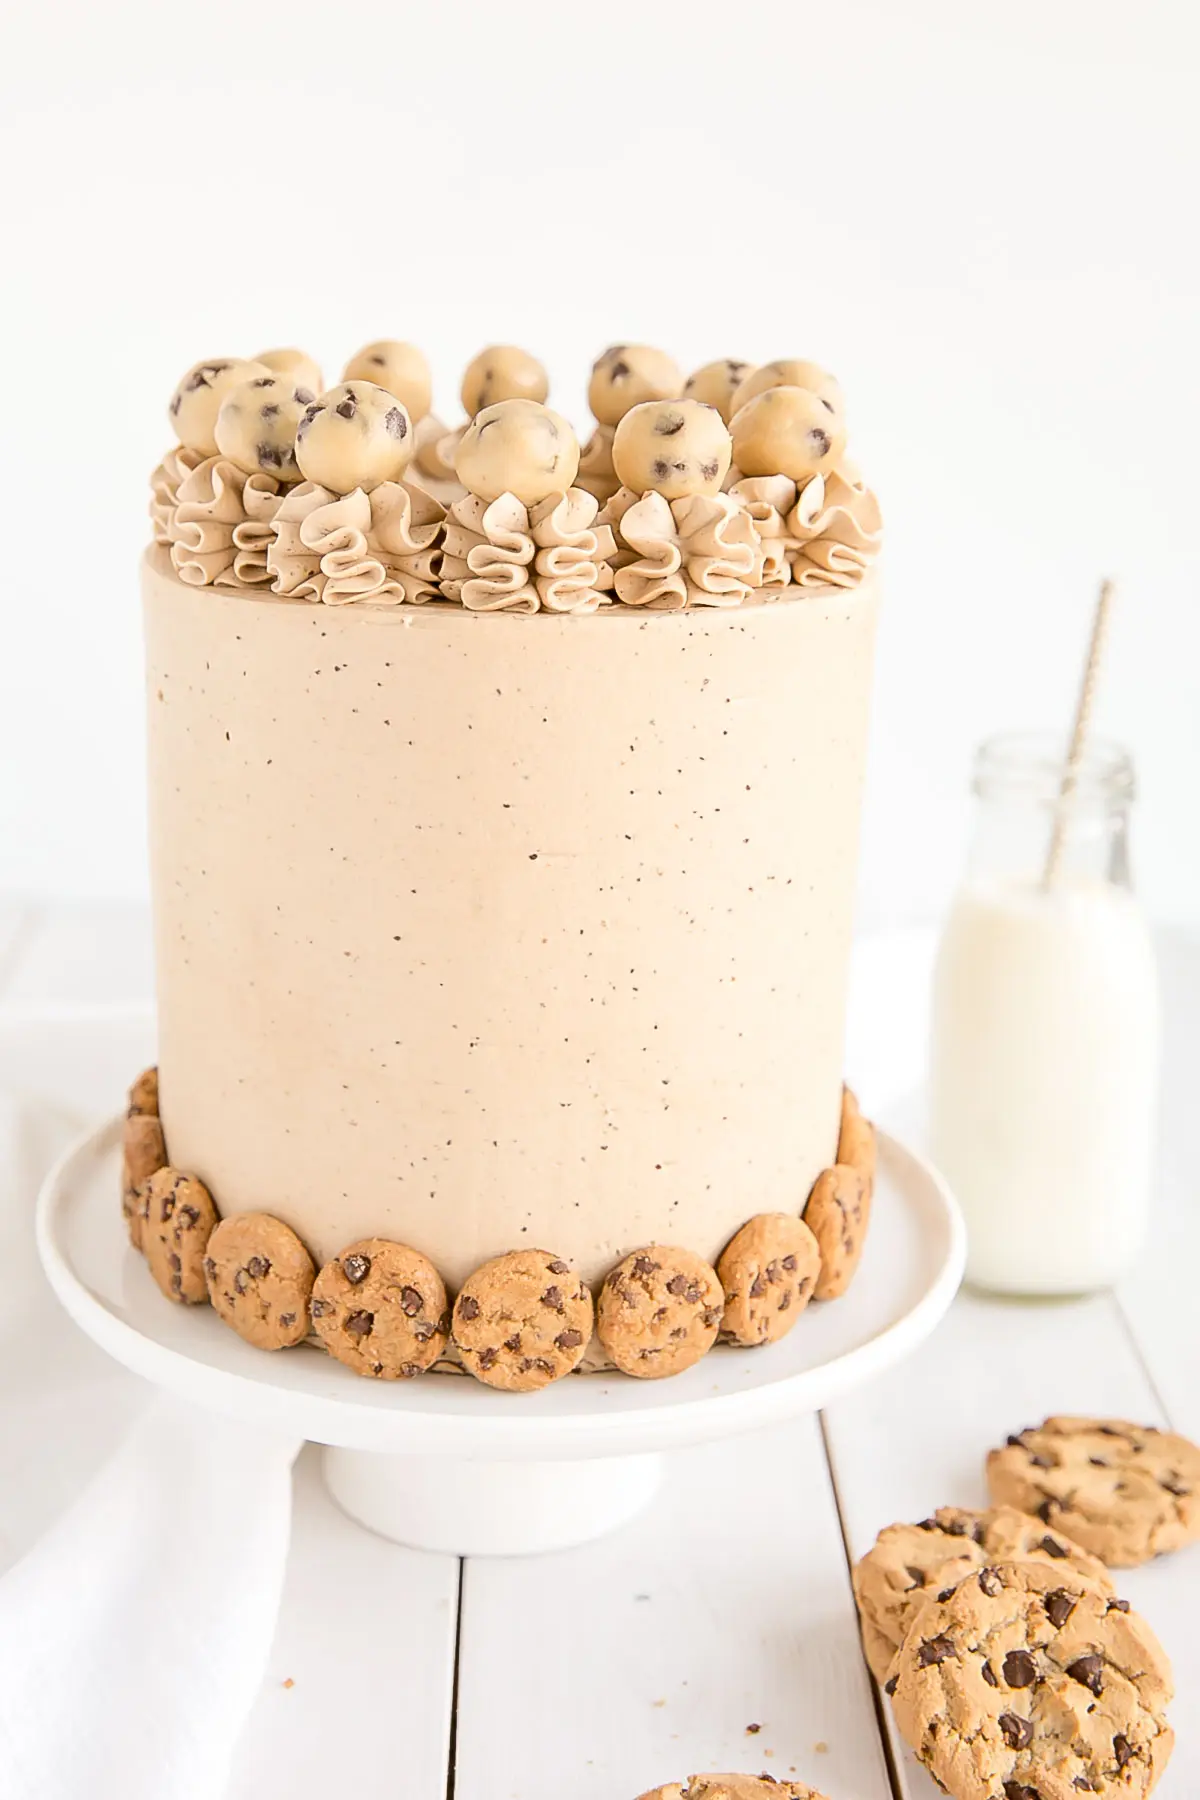 Chocolate chip cake layers, cookie dough filling and cookie frosting!